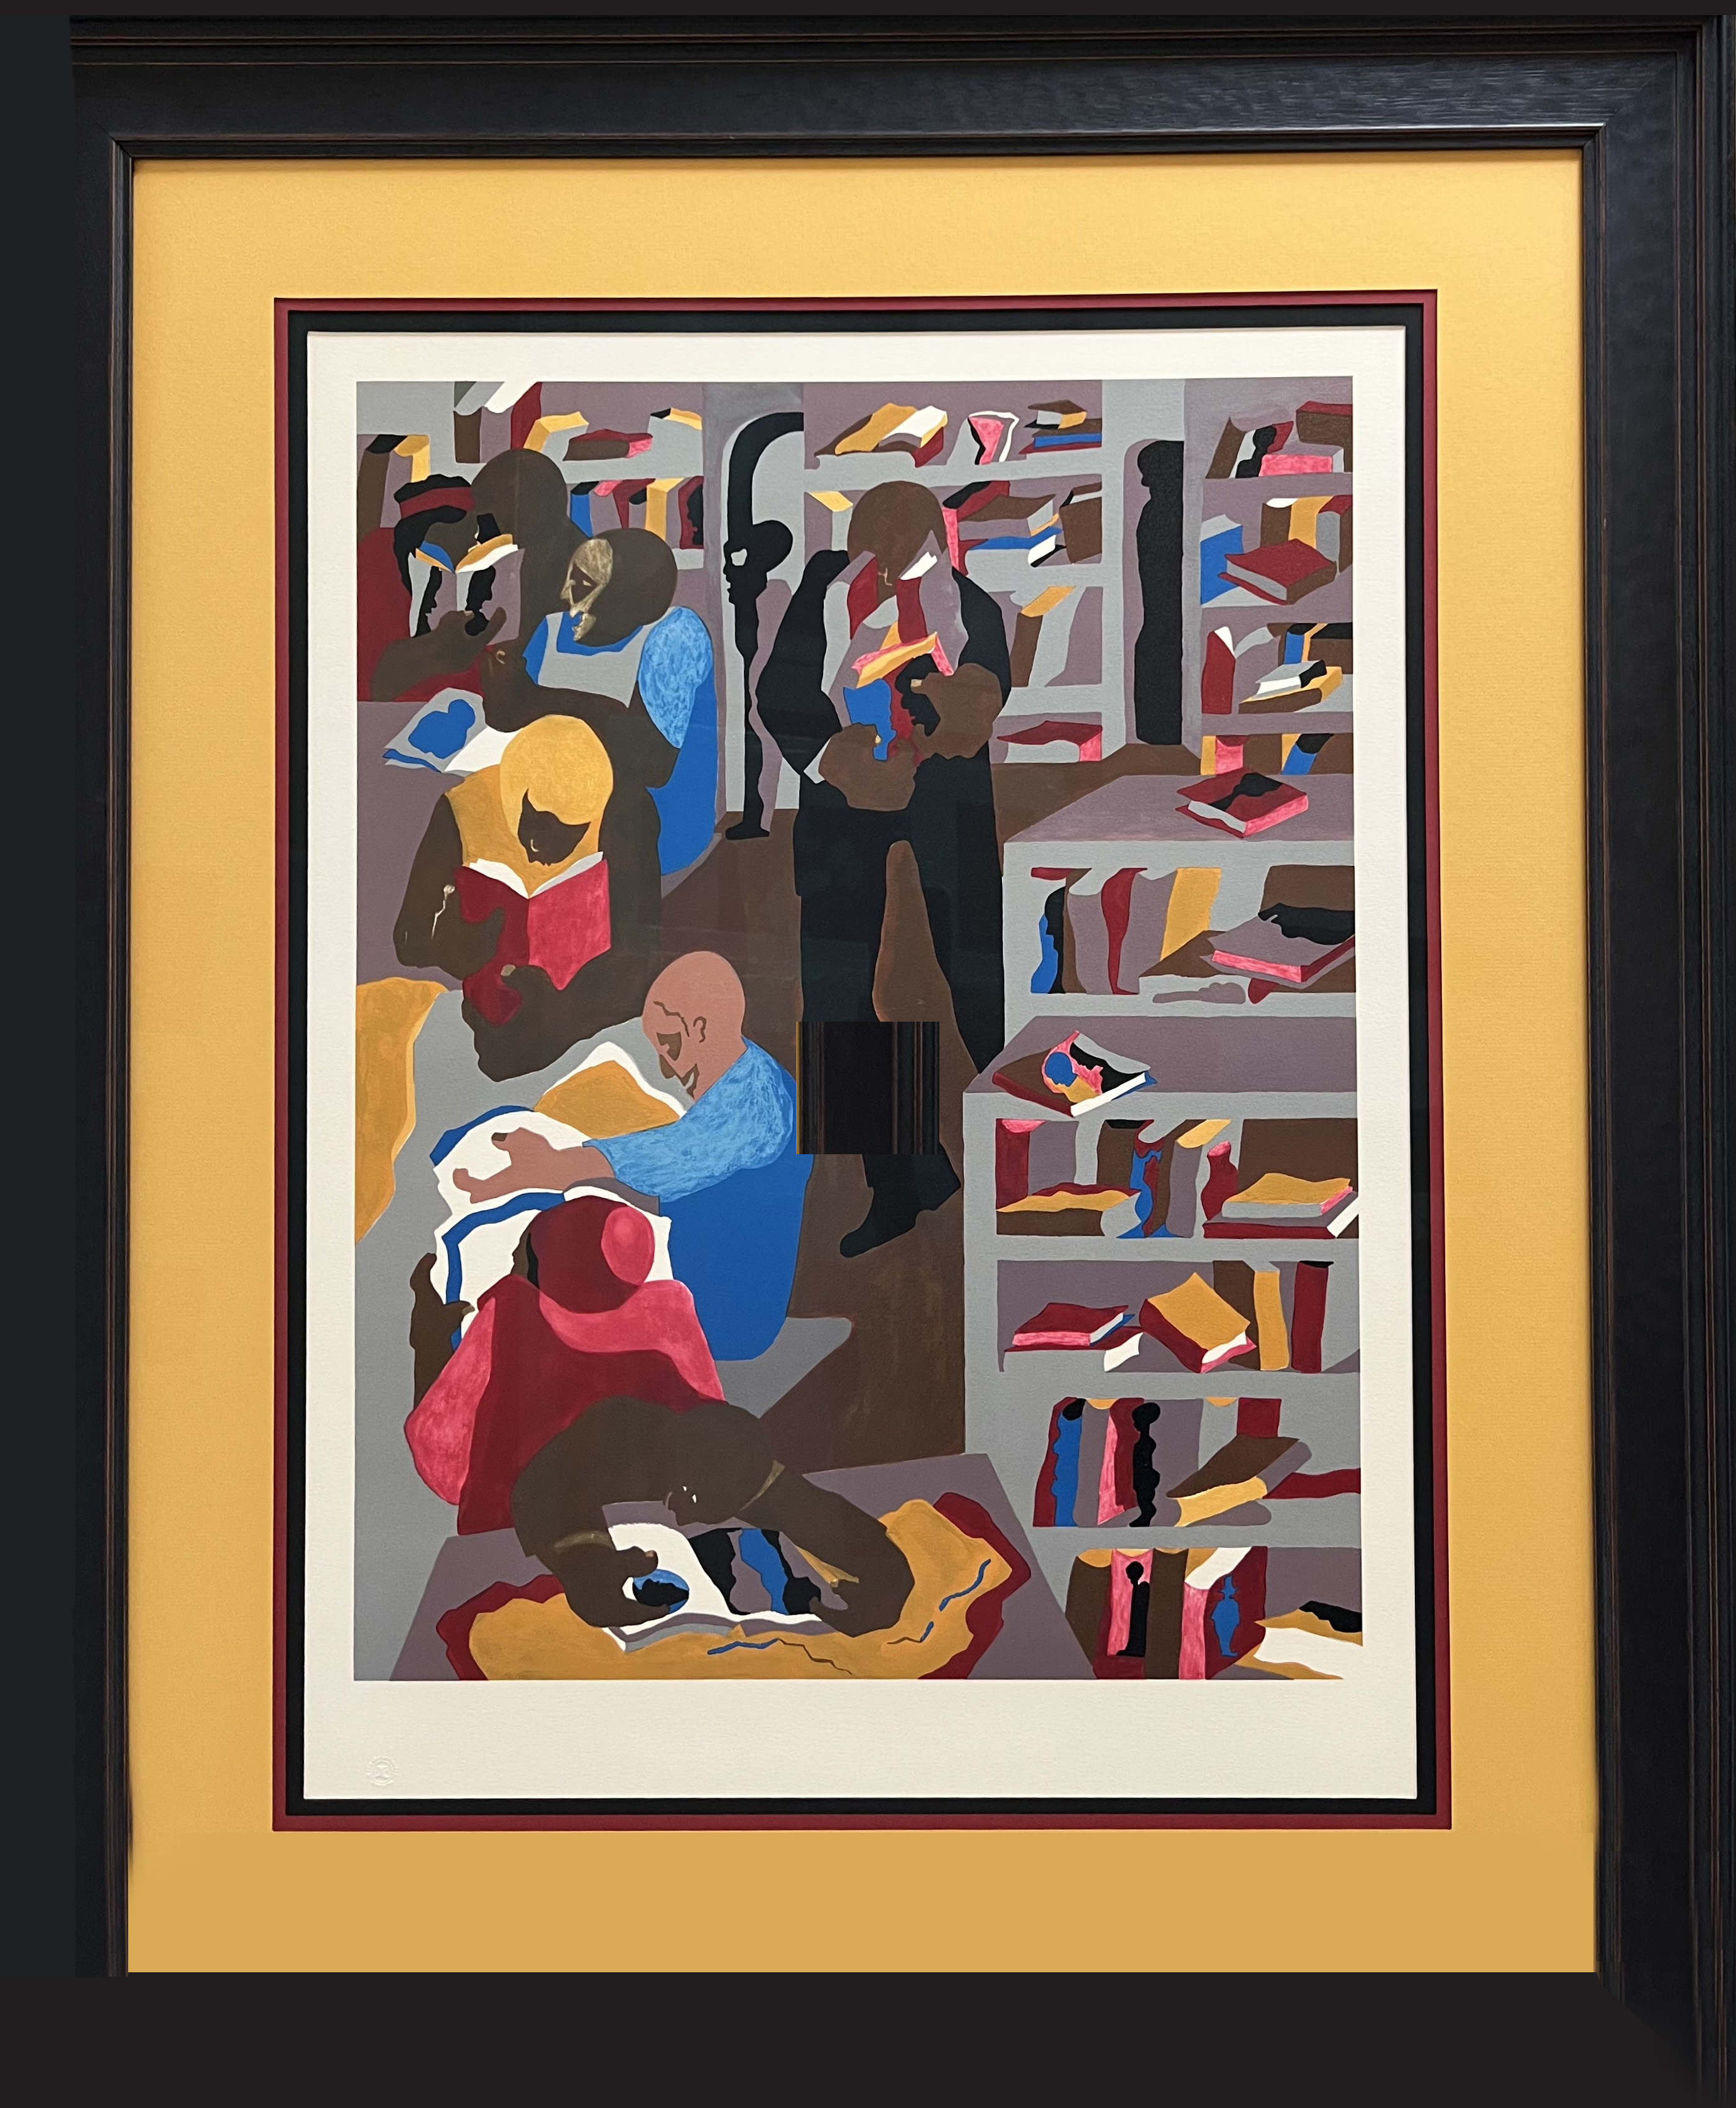 framed abstract art of people in a library. the frame is black and the matting is goldenrod